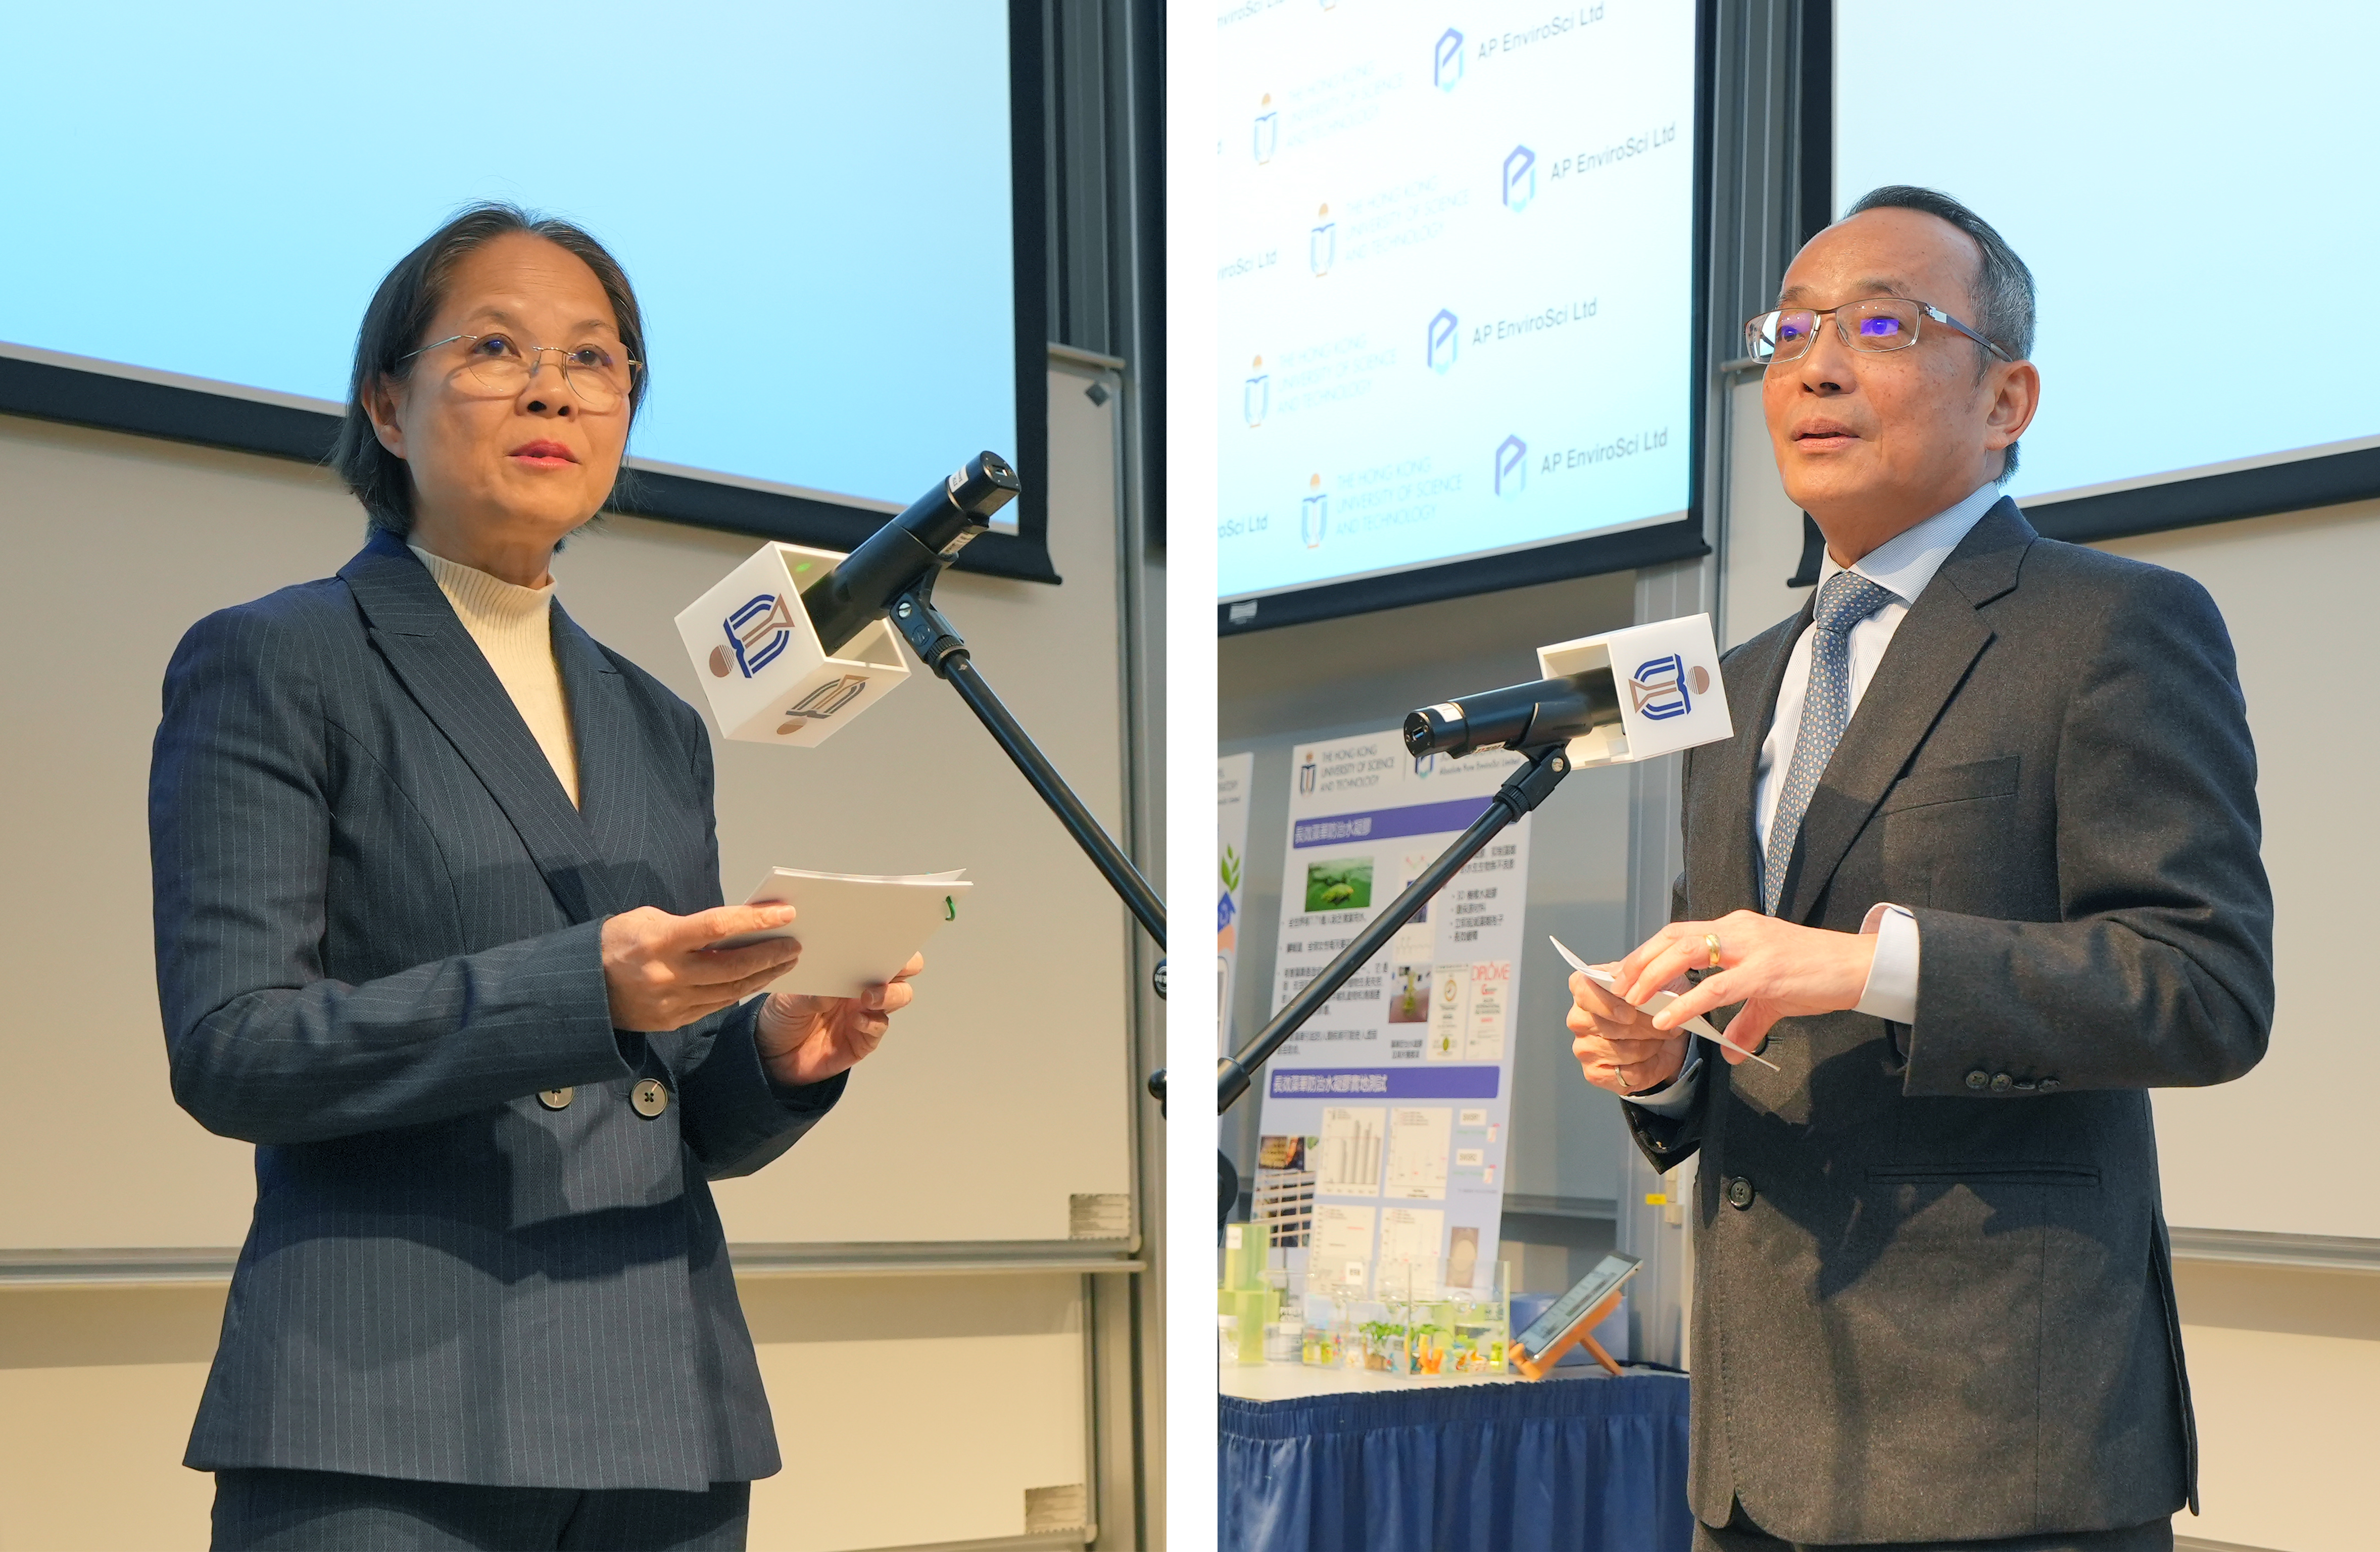 Miss Diane WONG Shuk-Han, Under Secretary for Environment and Ecology of the HKSAR (Left) and Prof. Tim CHENG, HKUST Vice-President for Research and Development (Right) speak in the ceremony. 